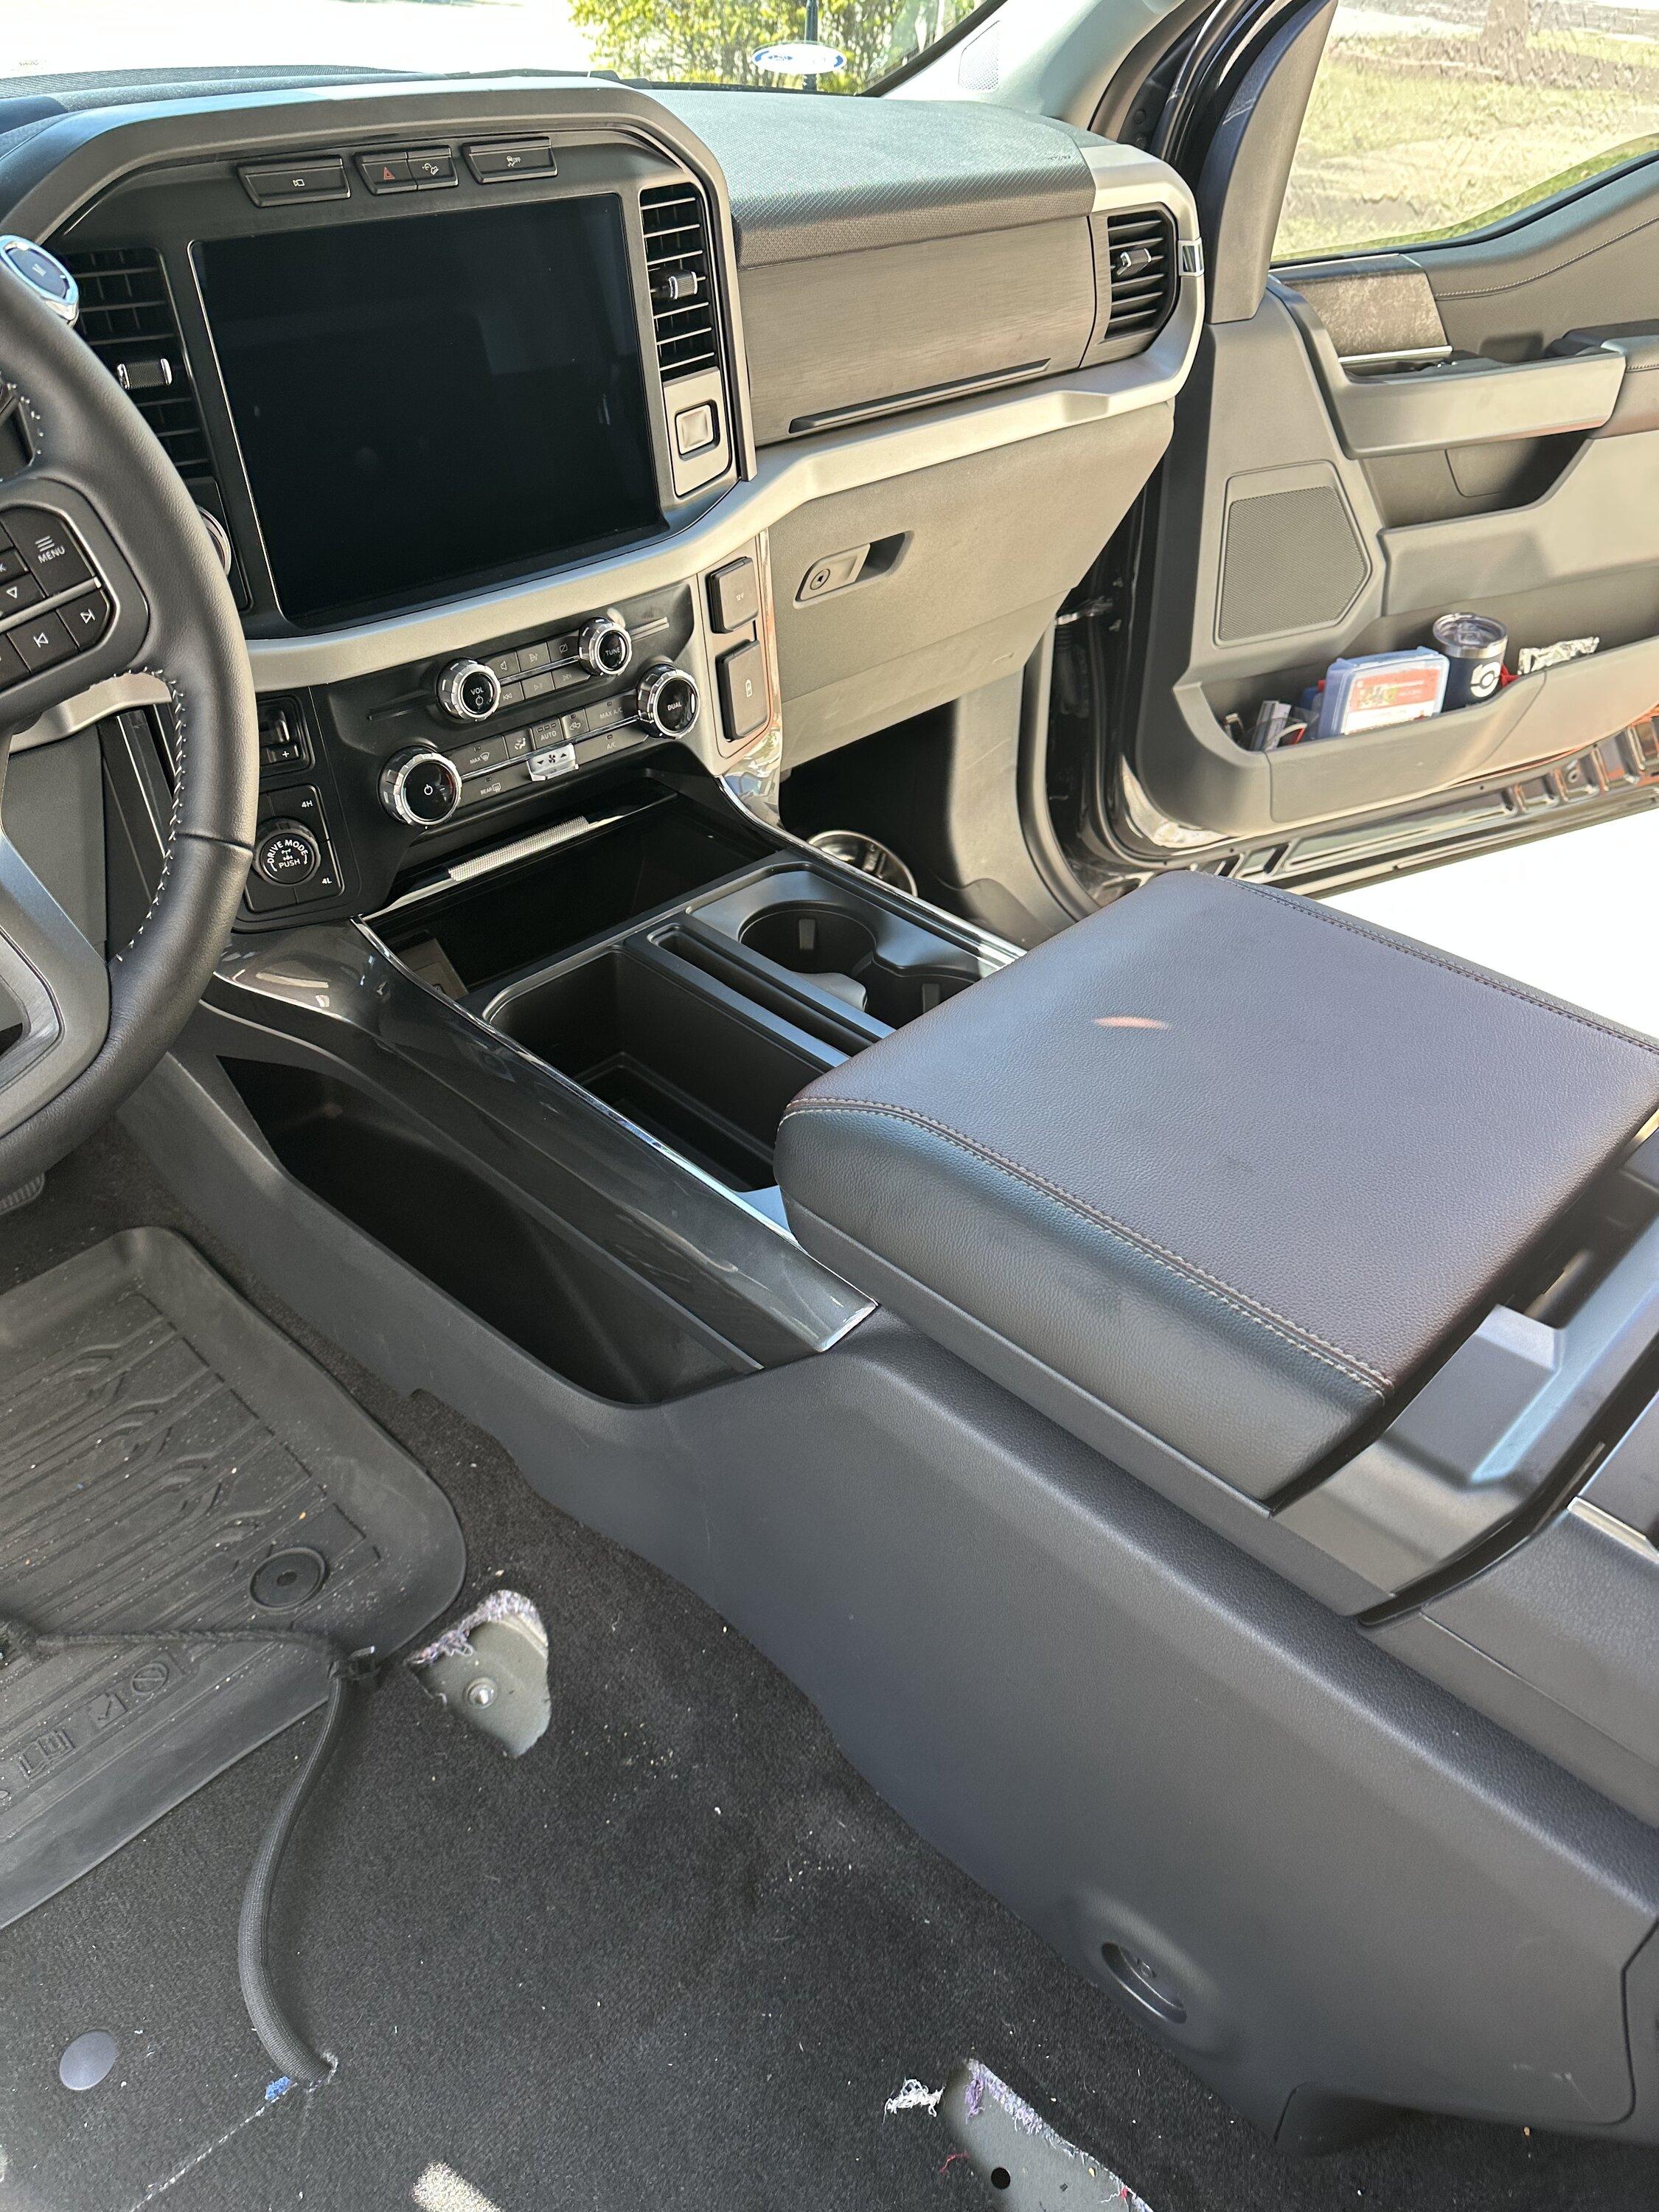 Ford F-150 Installed my center console and upgraded to 12” display 8EF8A384-91AA-4D4C-ABED-C6BE4400BA5A